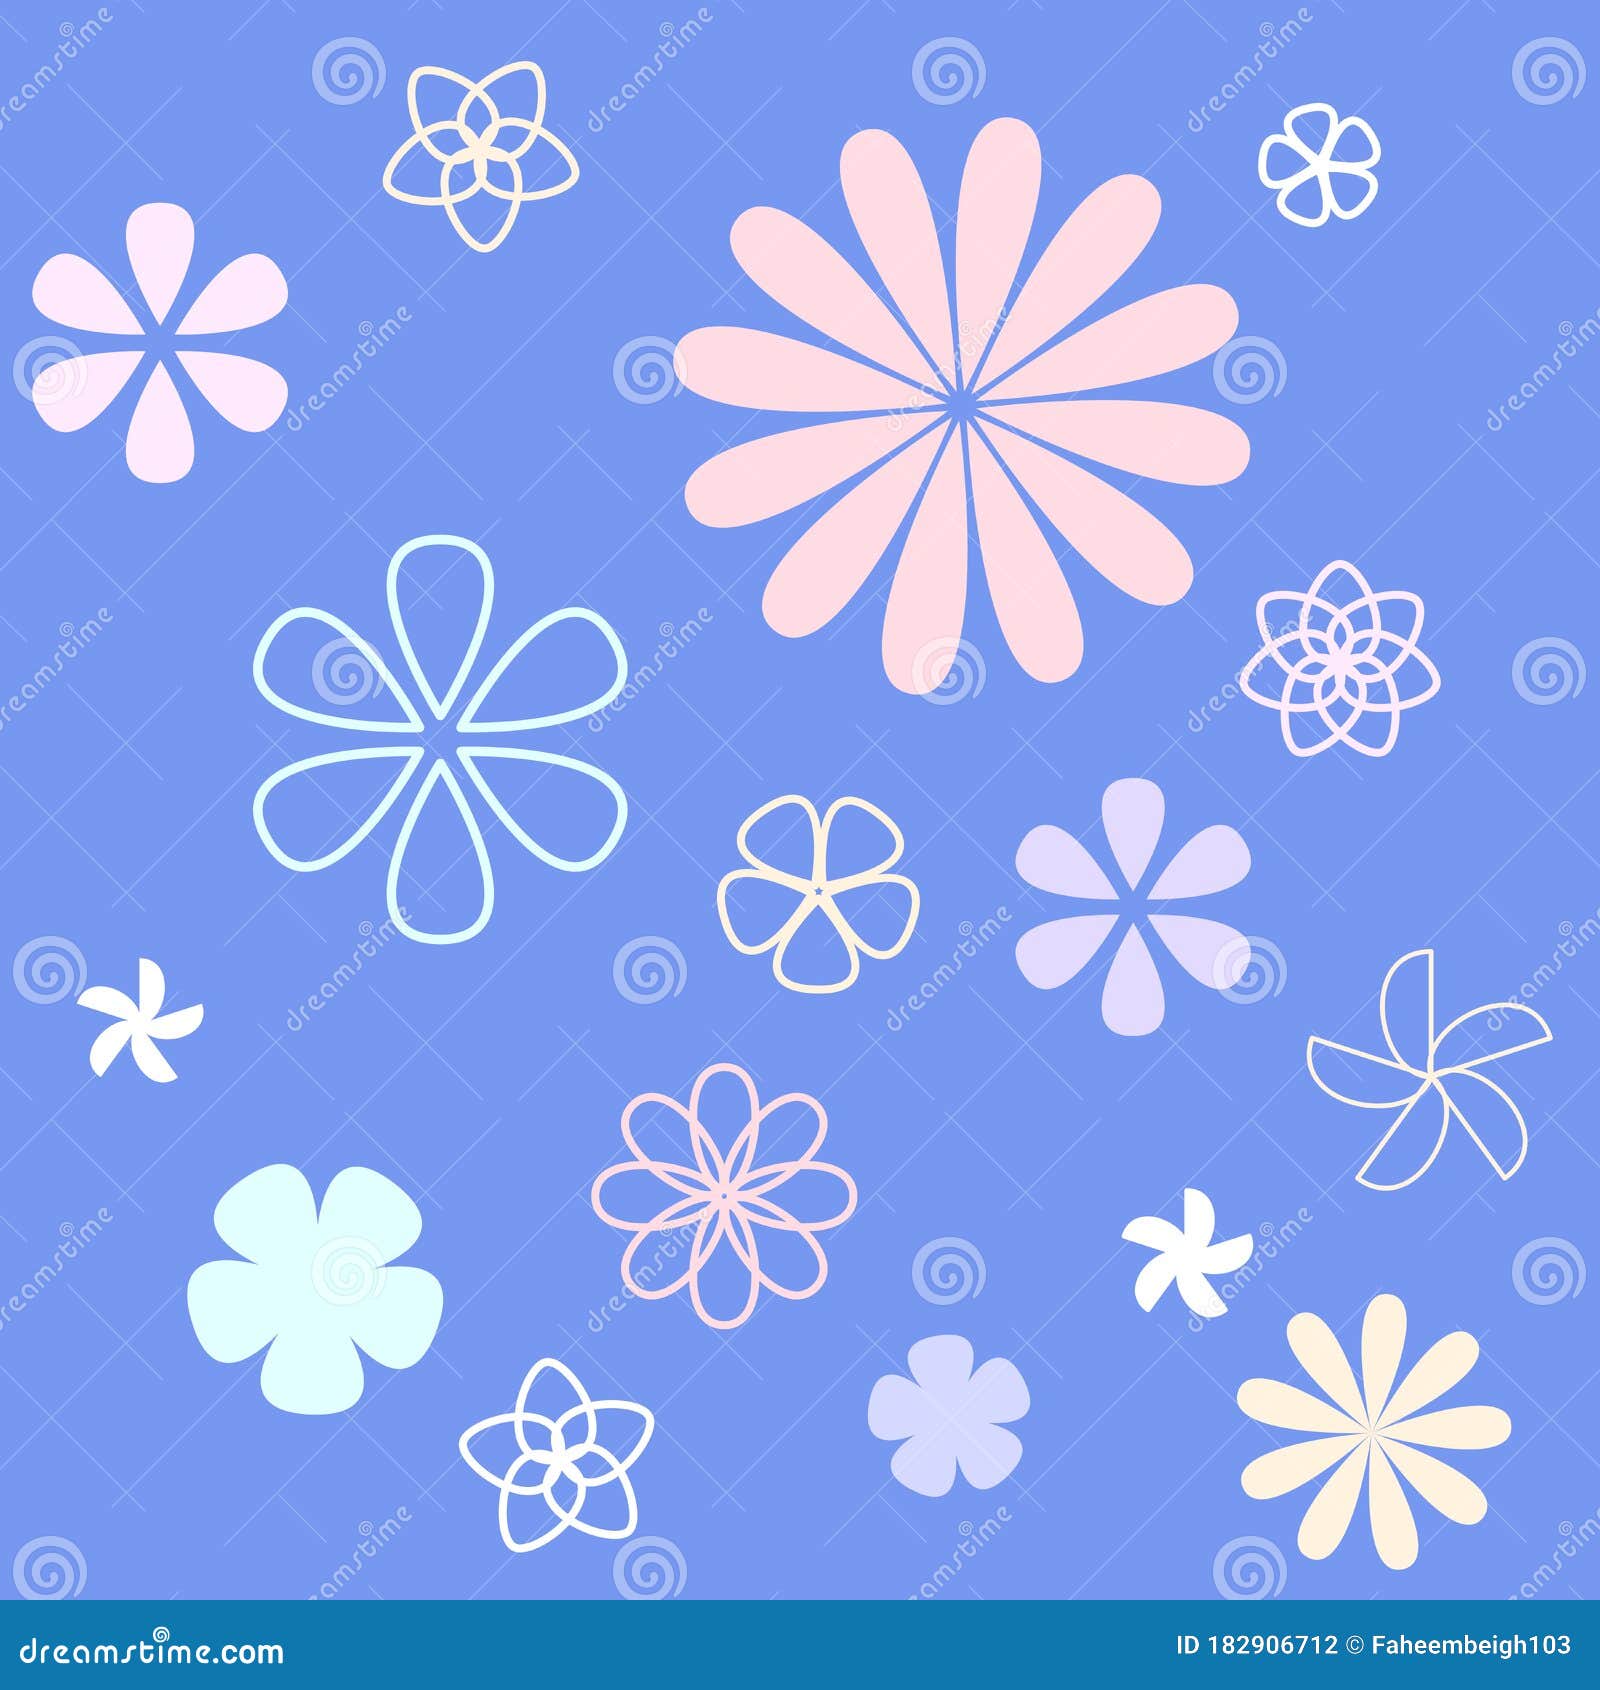 Download Beautiful Abstract Seamless Floral Design Pattern In Vibrant Bright Colors Stock Illustration Illustration Of Blossom Cartoon 182906712